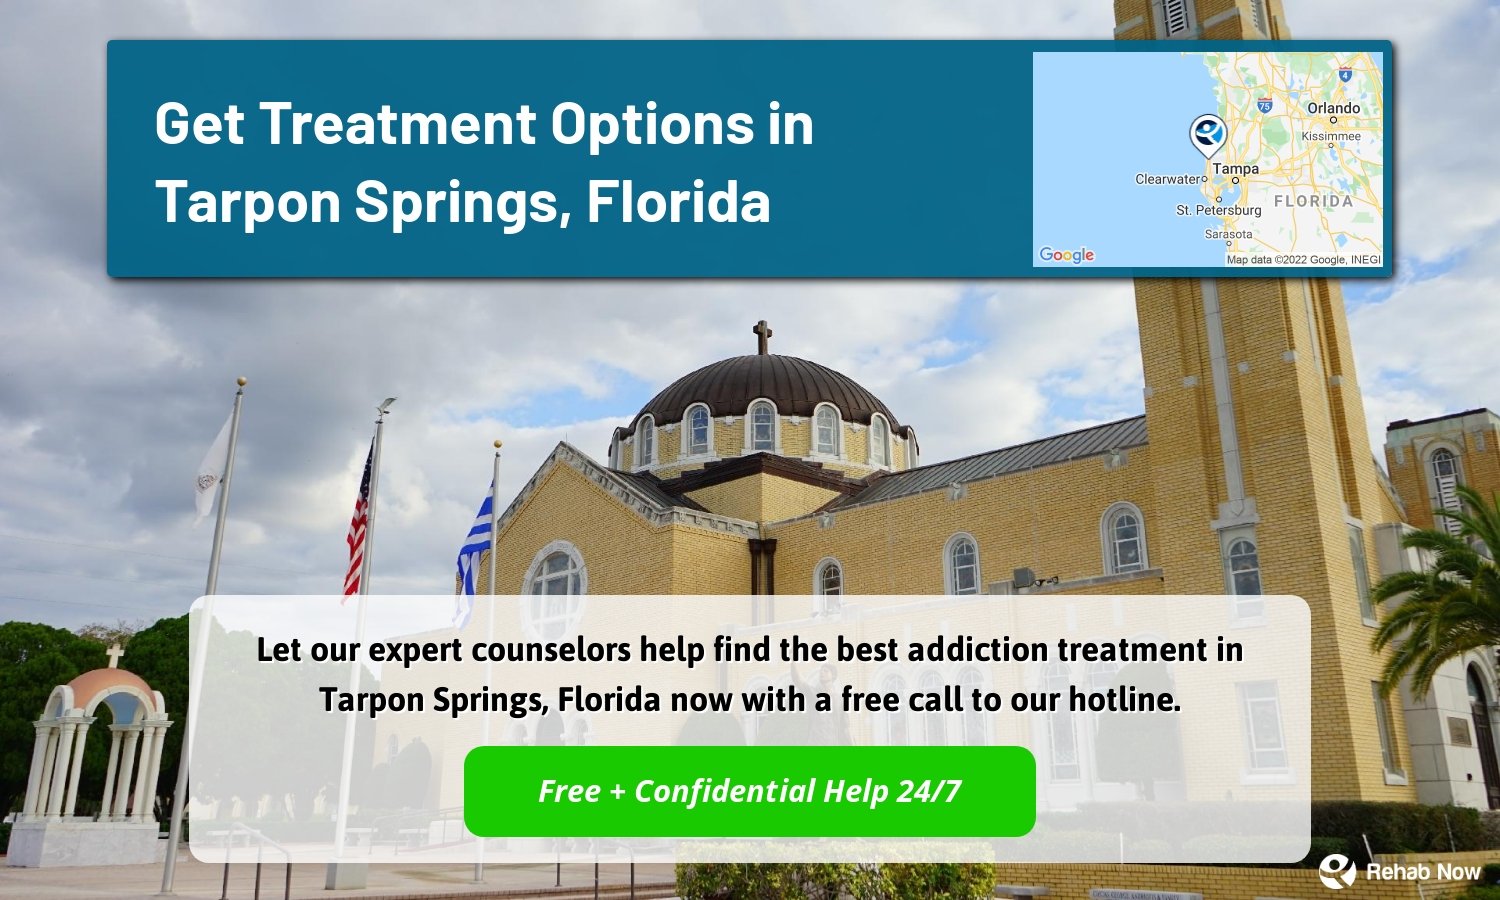 Let our expert counselors help find the best addiction treatment in Tarpon Springs, Florida now with a free call to our hotline.